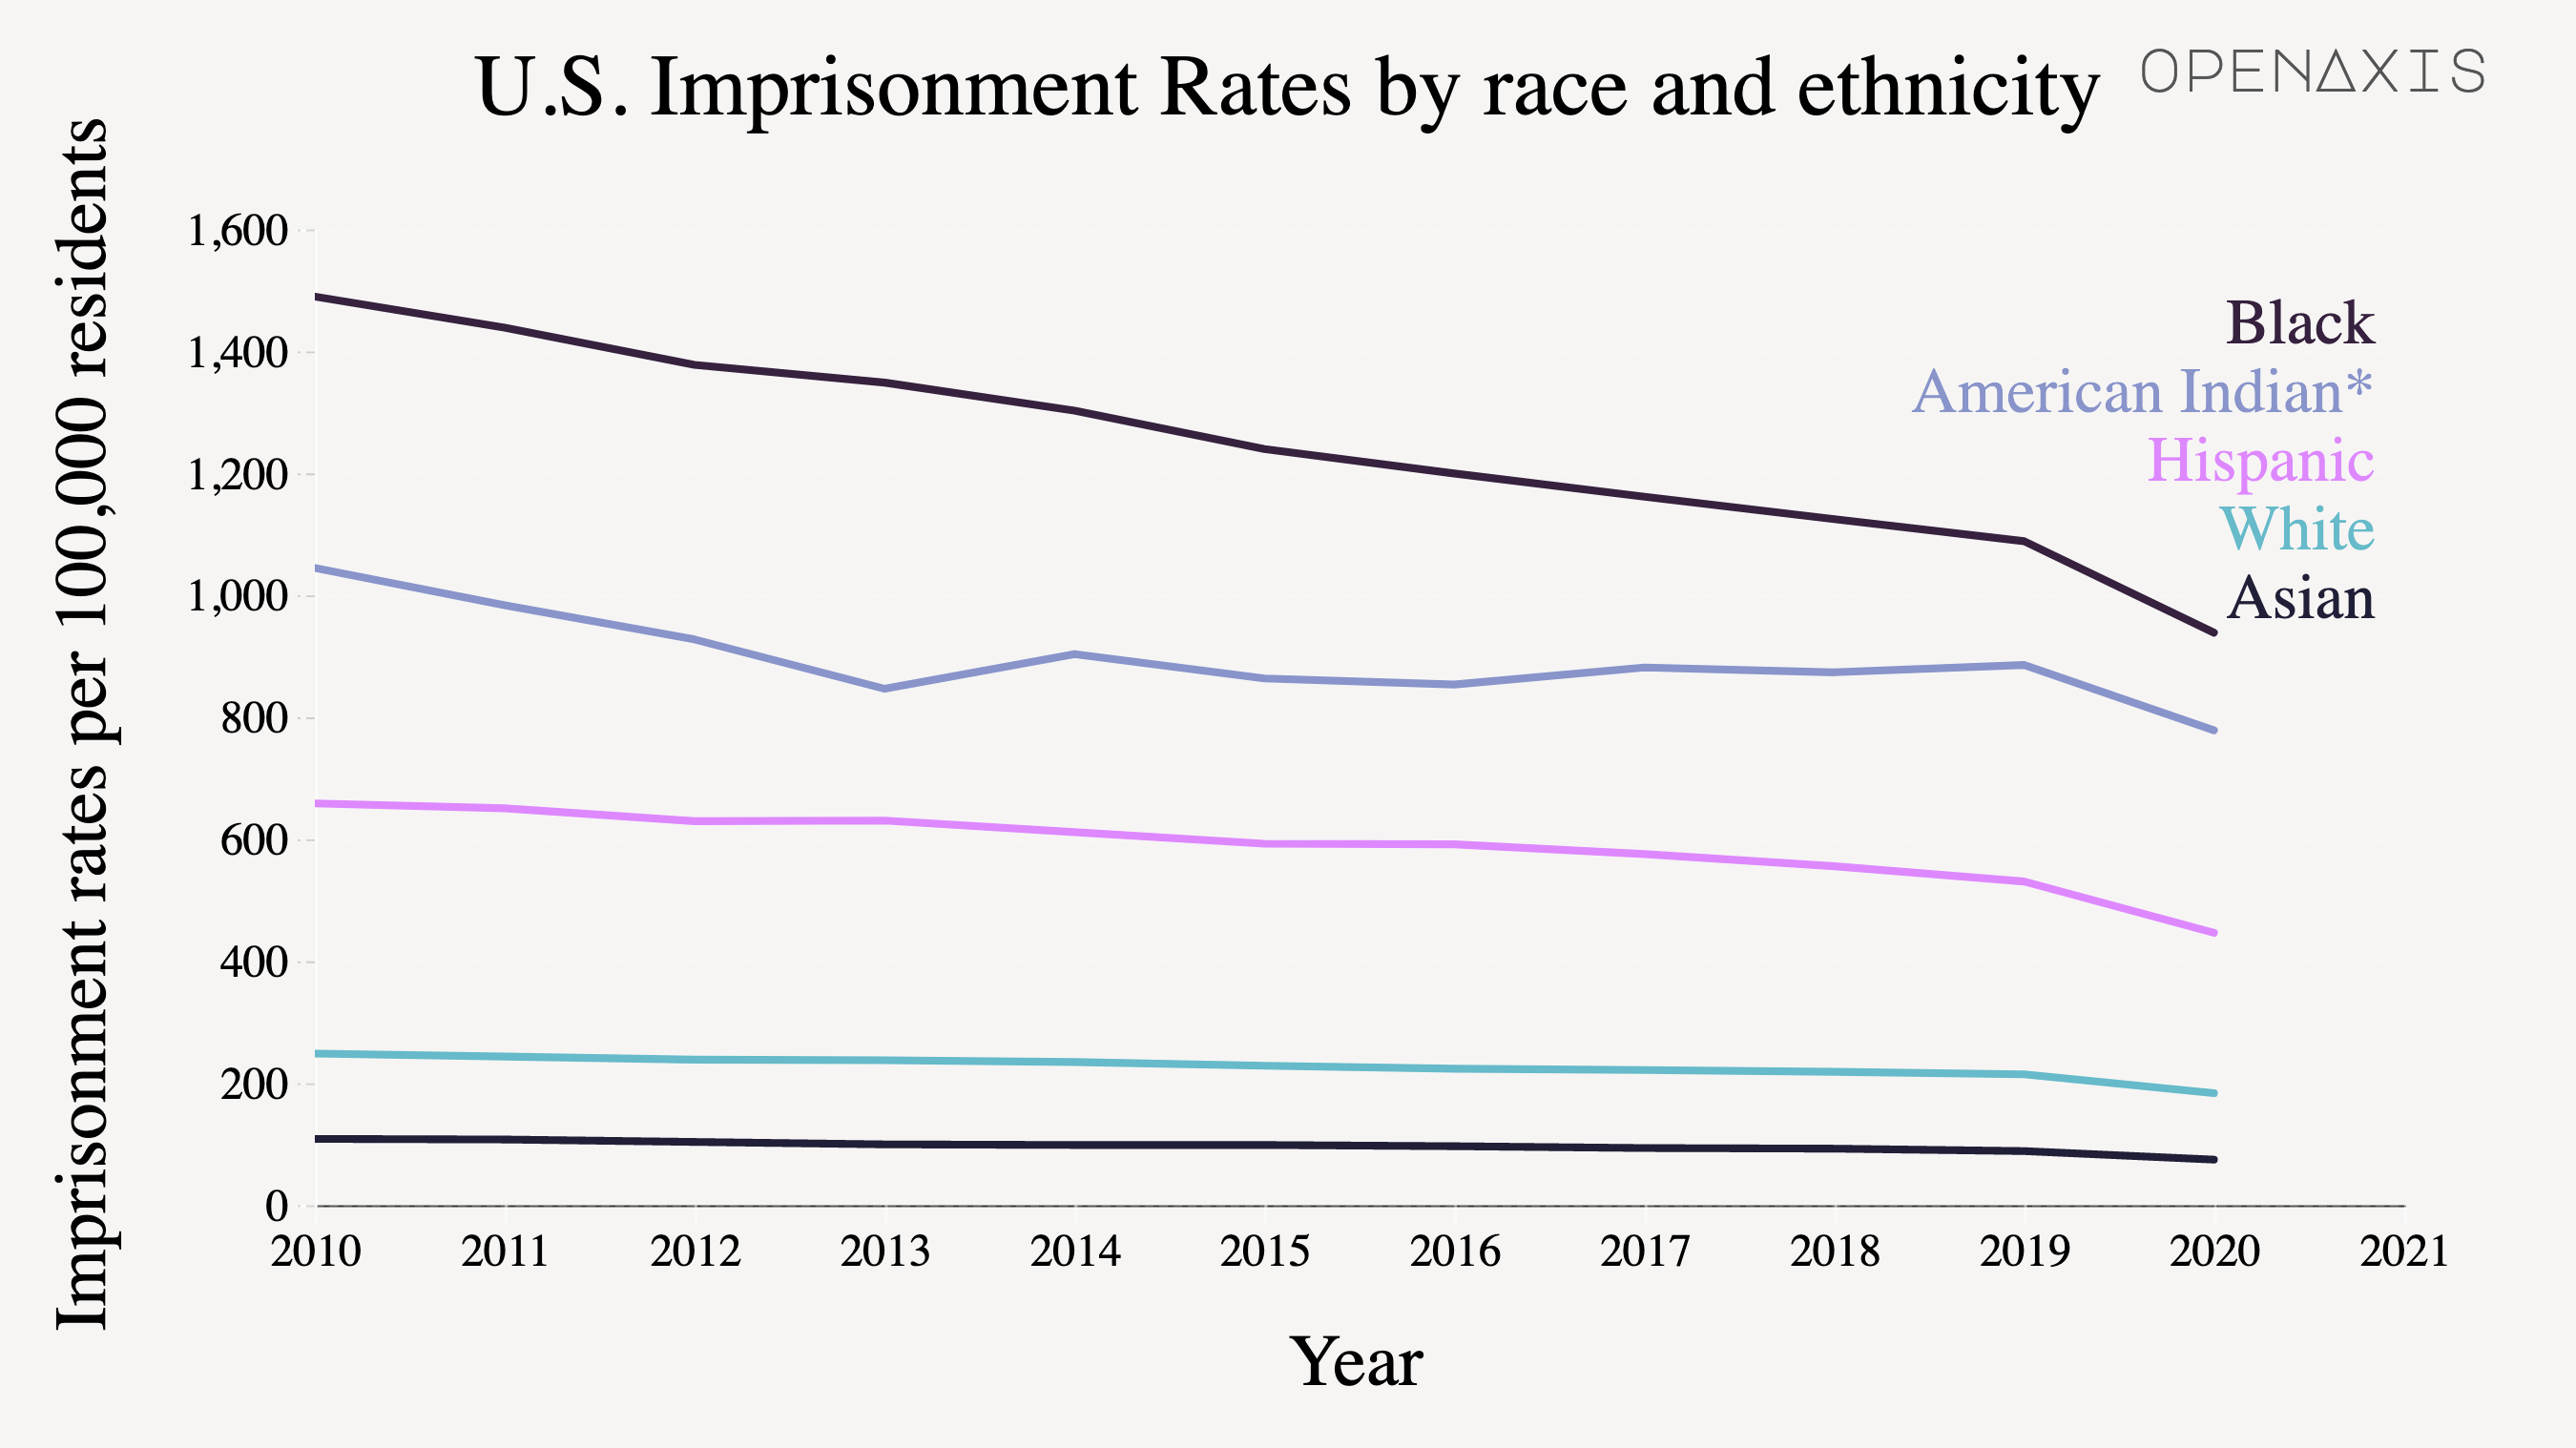 "U.S. Imprisonment Rates by race and ethnicity"